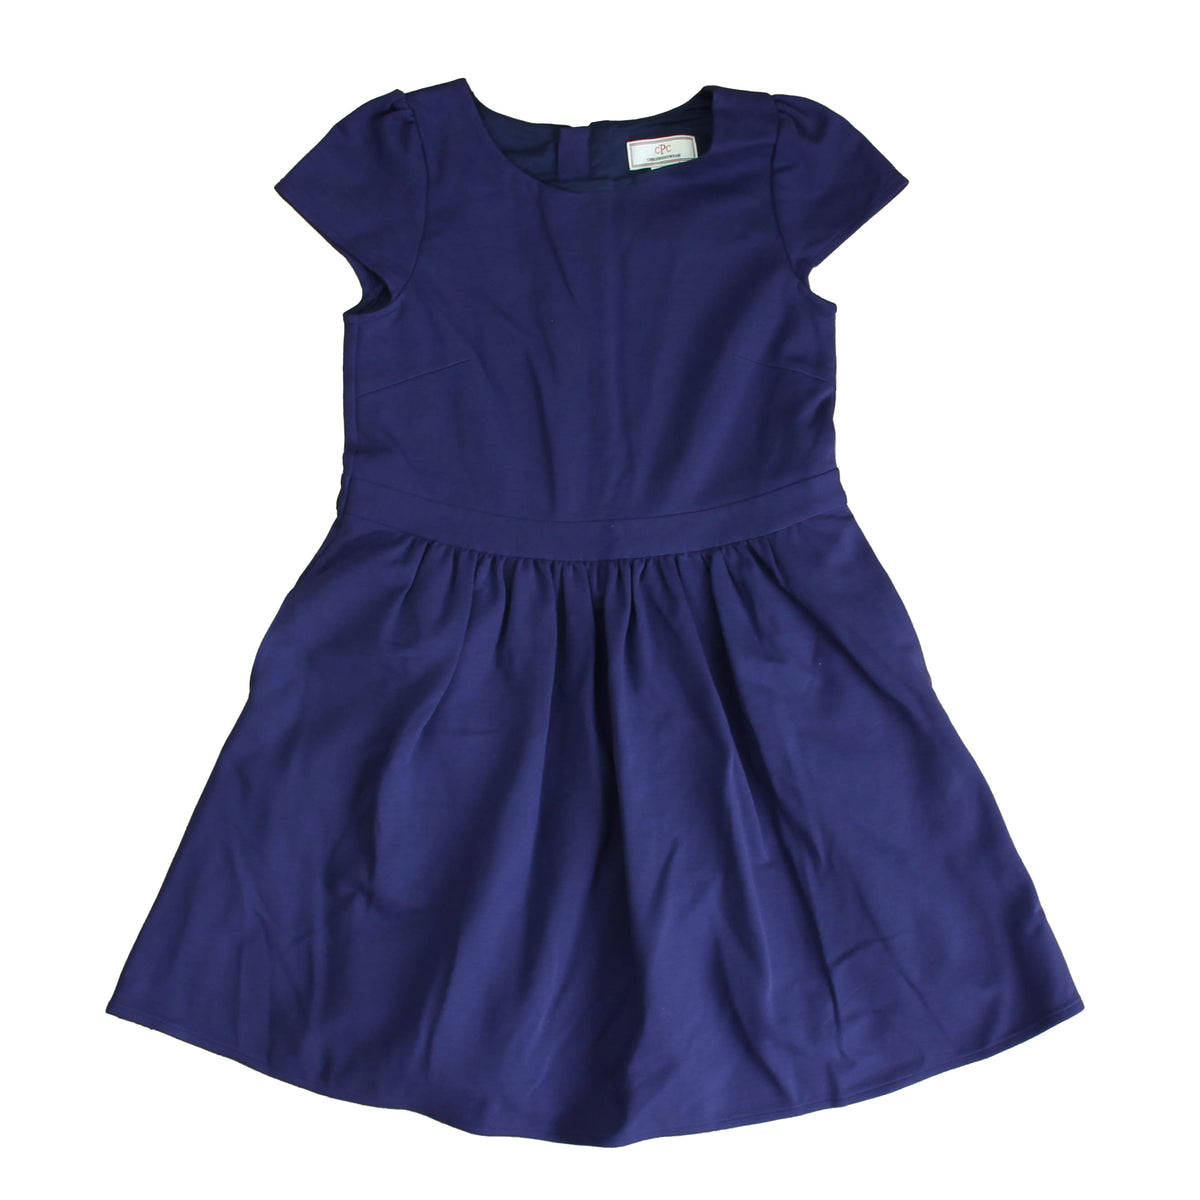 New with Tags: Navy Dress -- FINAL SALE